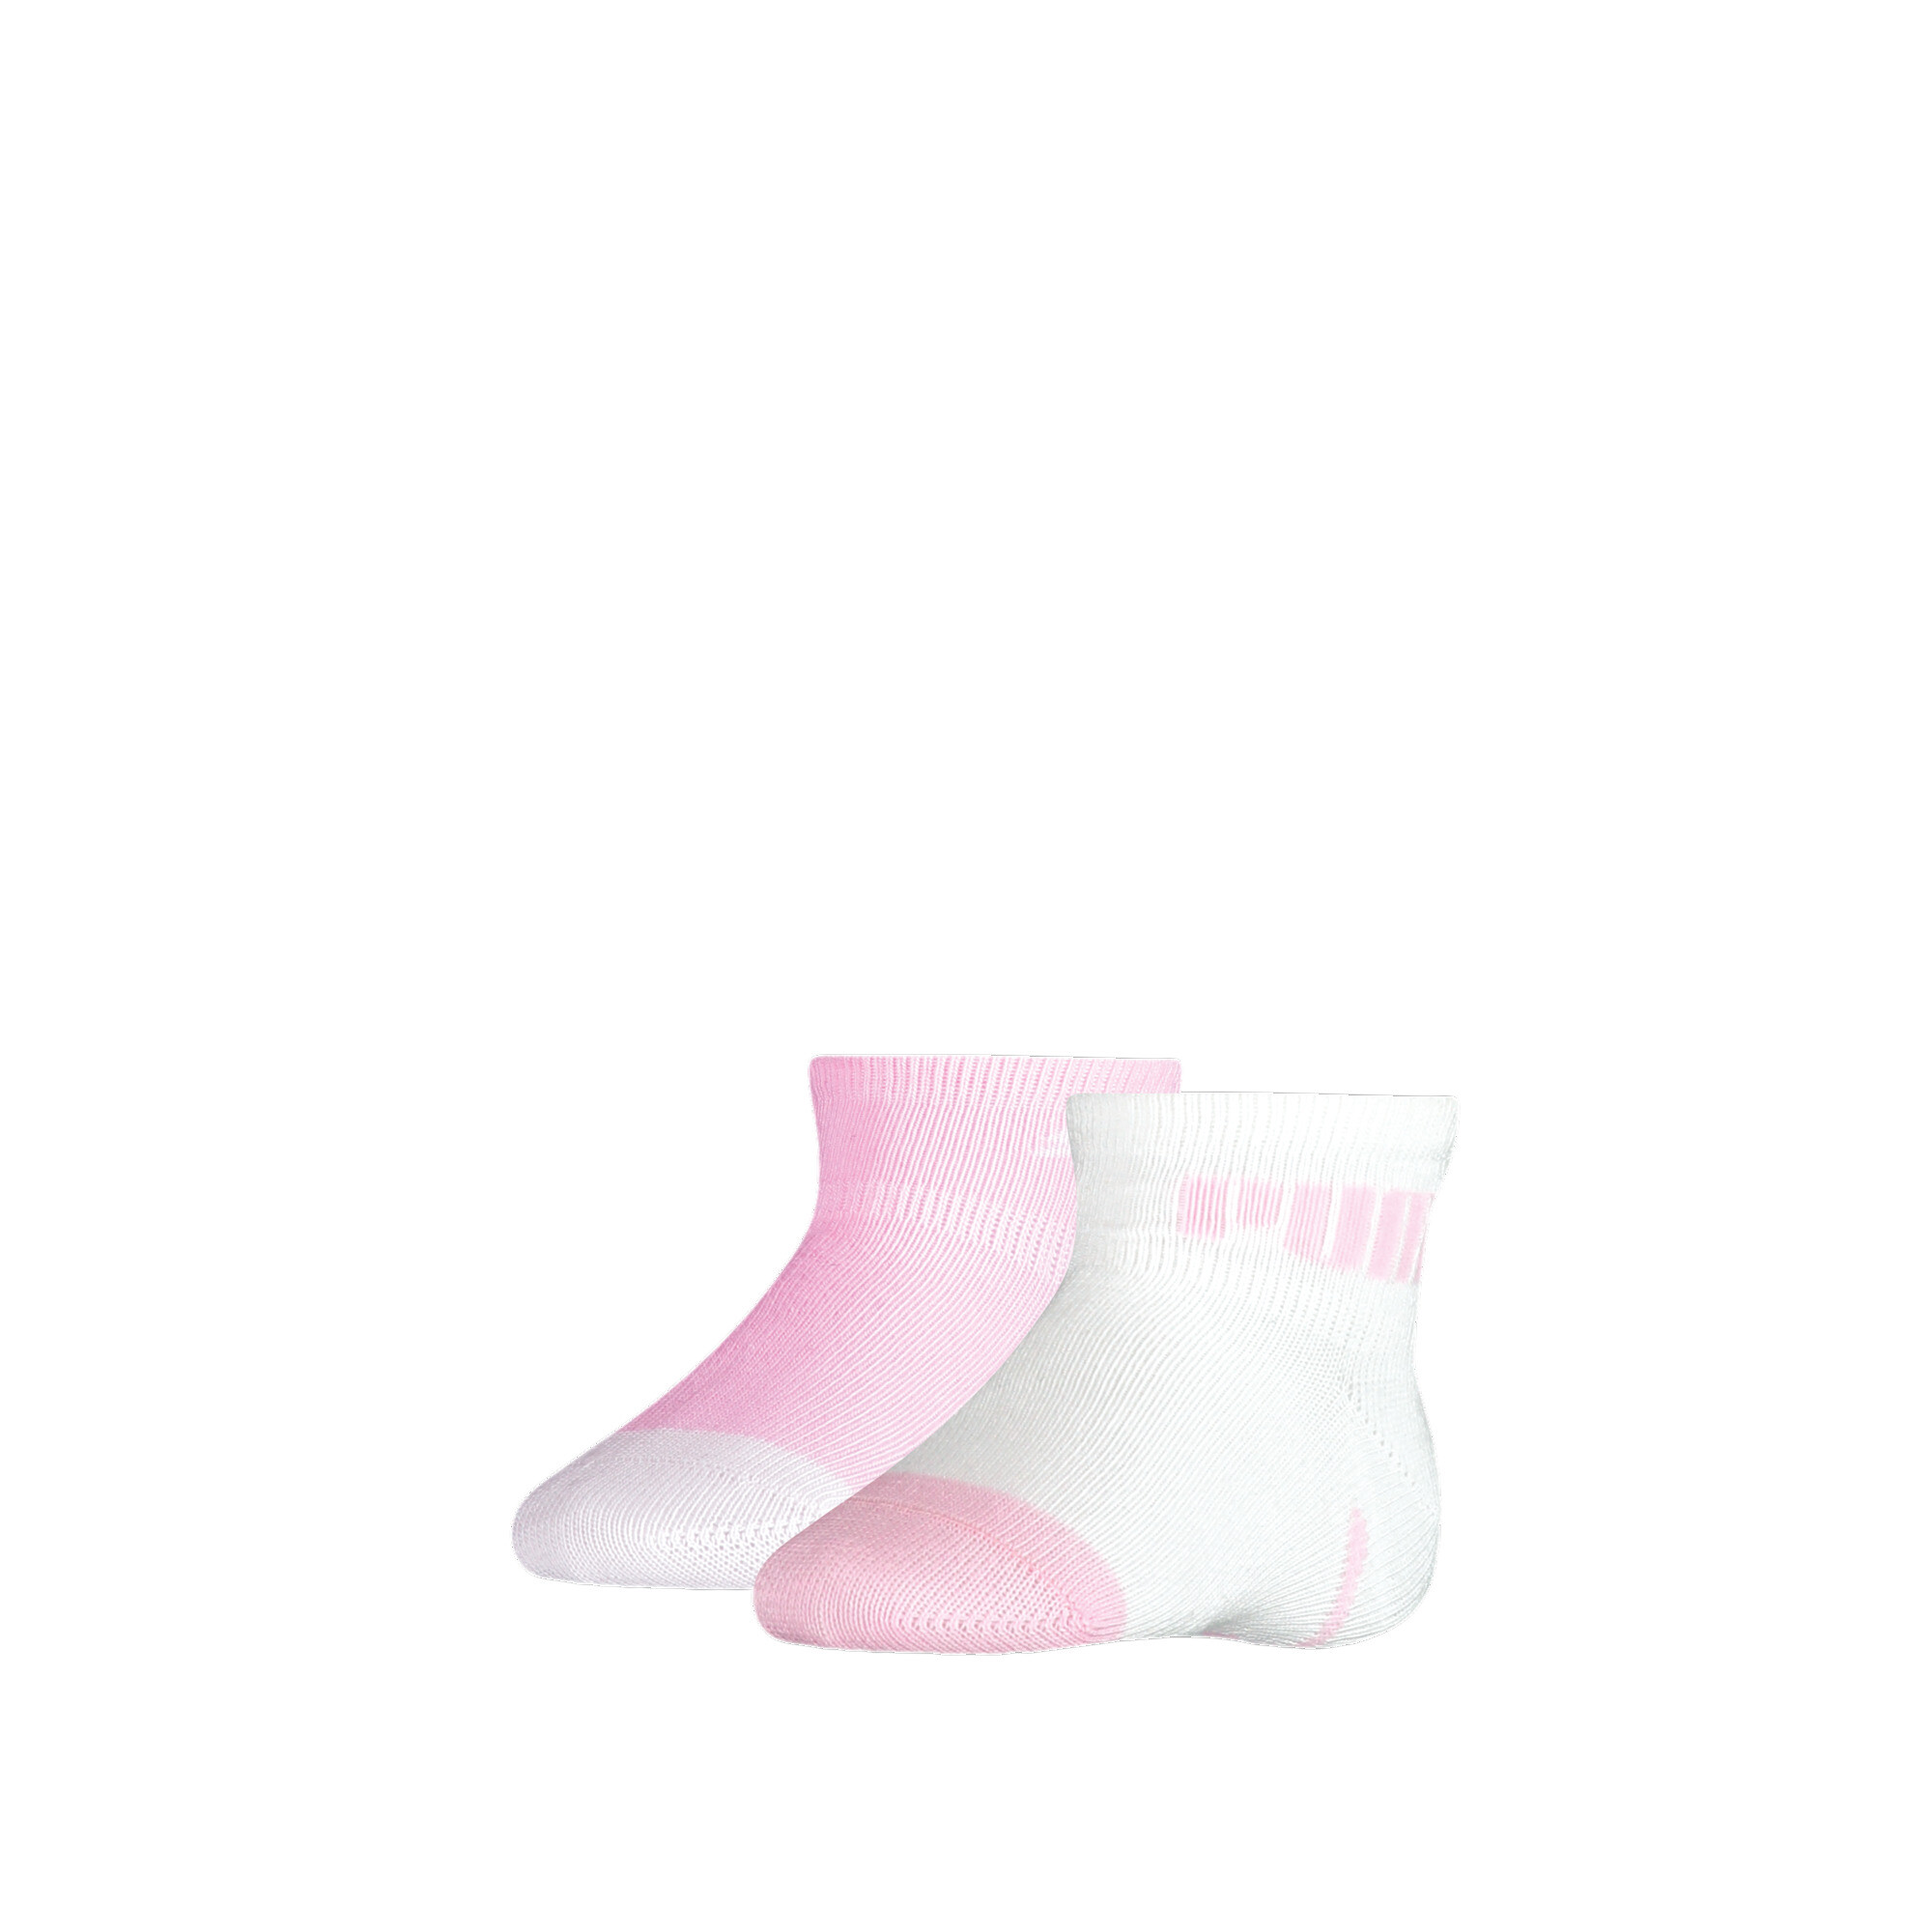 Kids' PUMA Baby Mini Cats Lifestyle Socks 2 Pack In Pink, Size 19-22